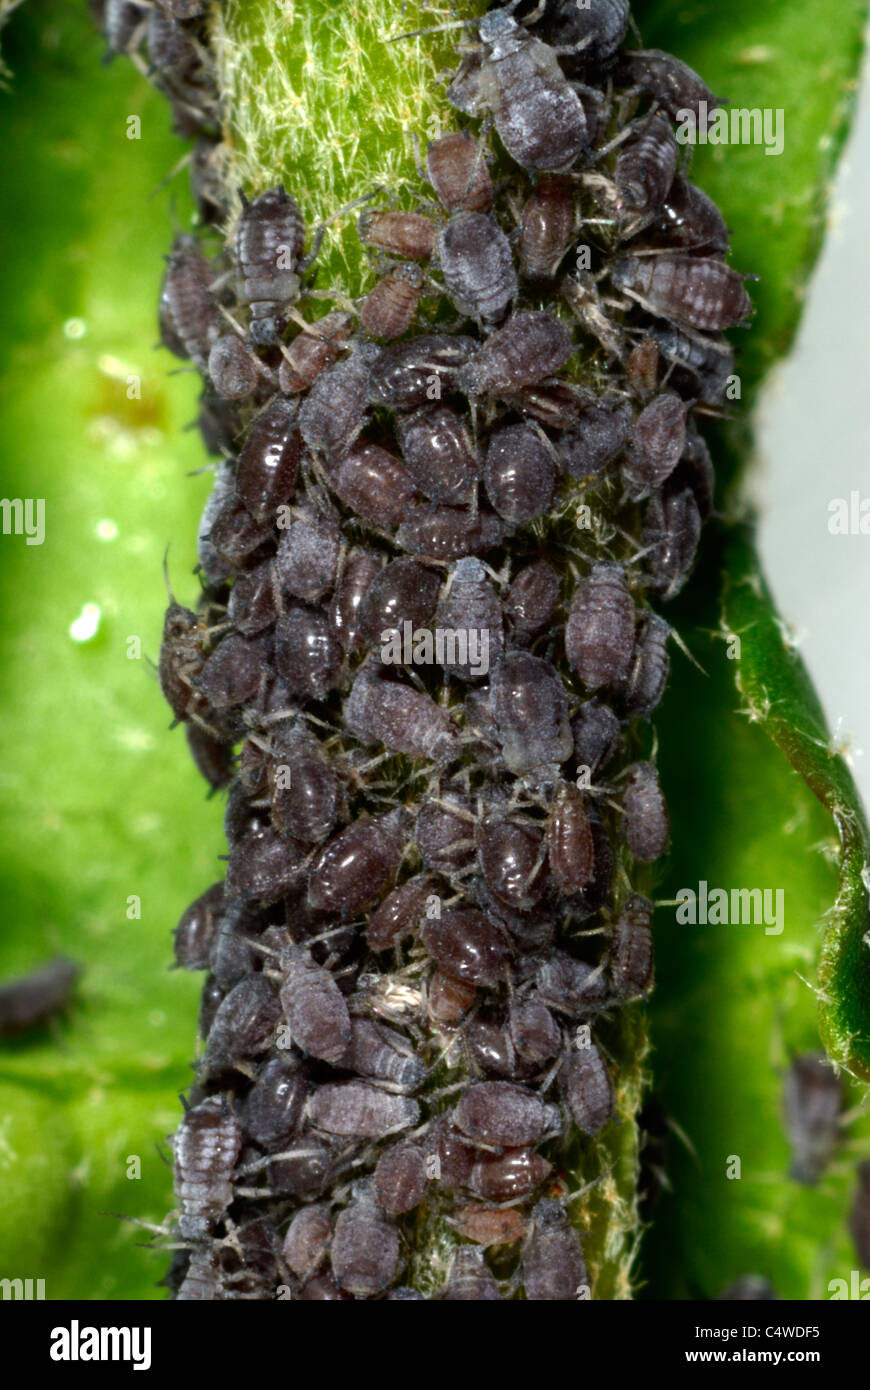 Ivy aphids (Aphis hederae) on tree ivy (Fatshedera lizei) Stock Photo